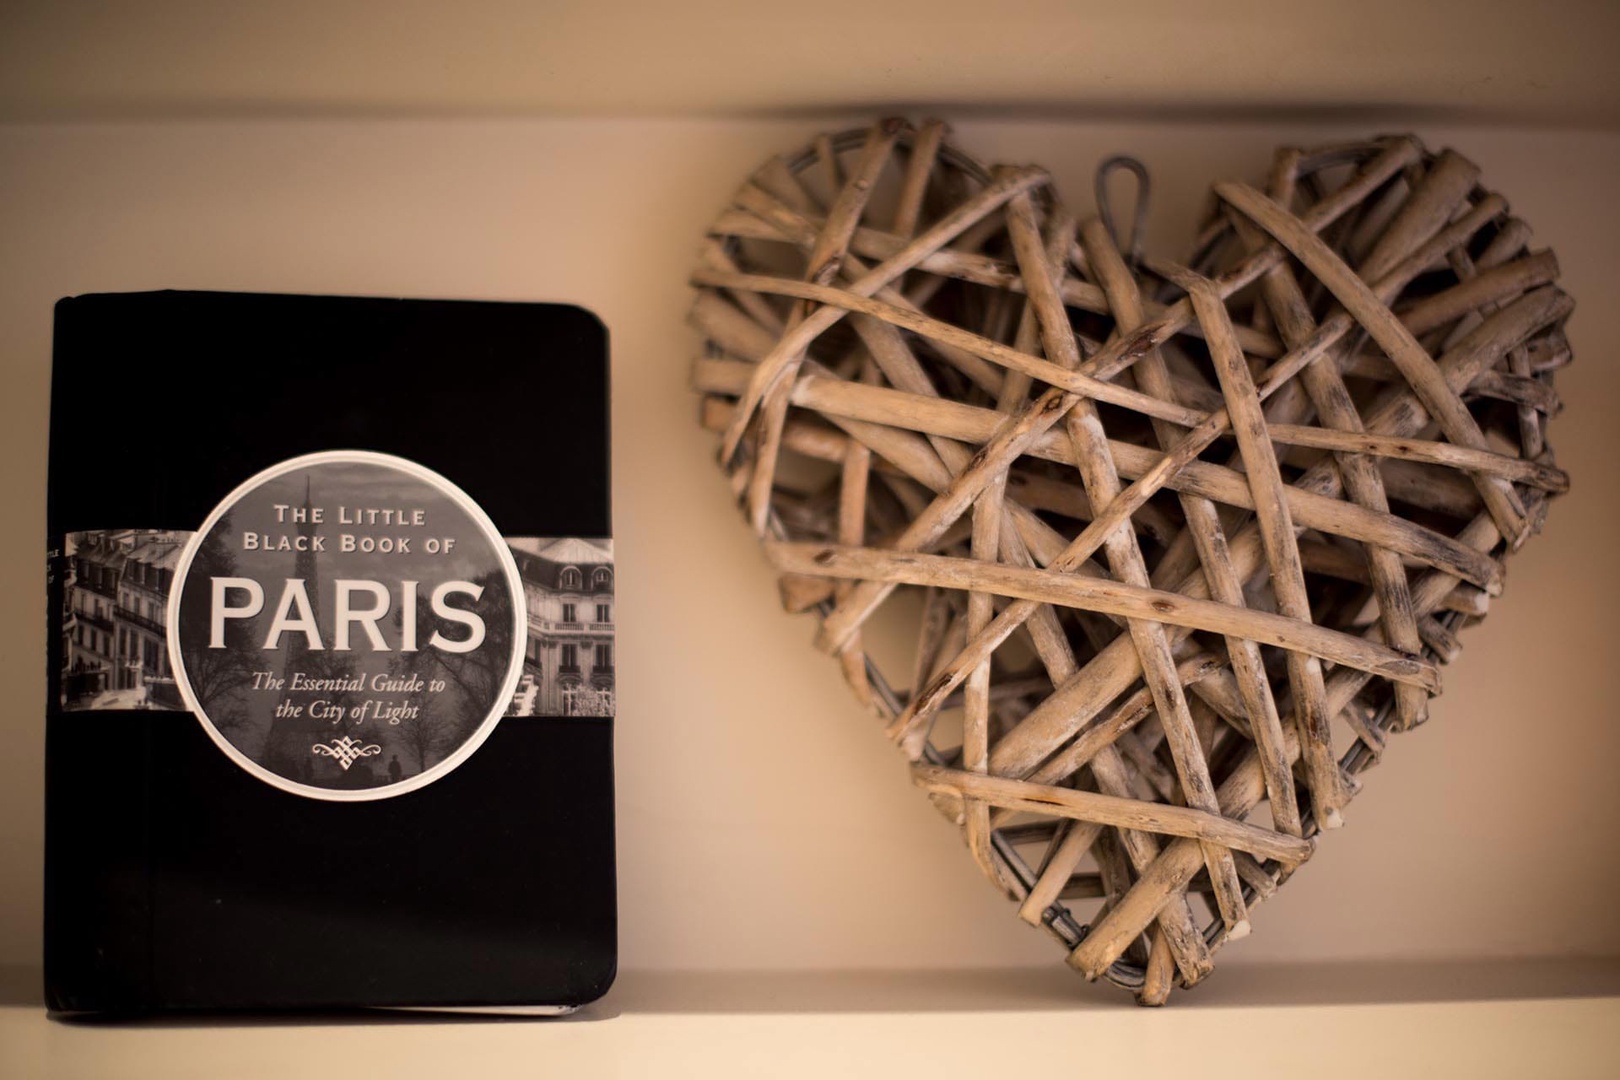 Let the Rully help you fall in love with Paris!